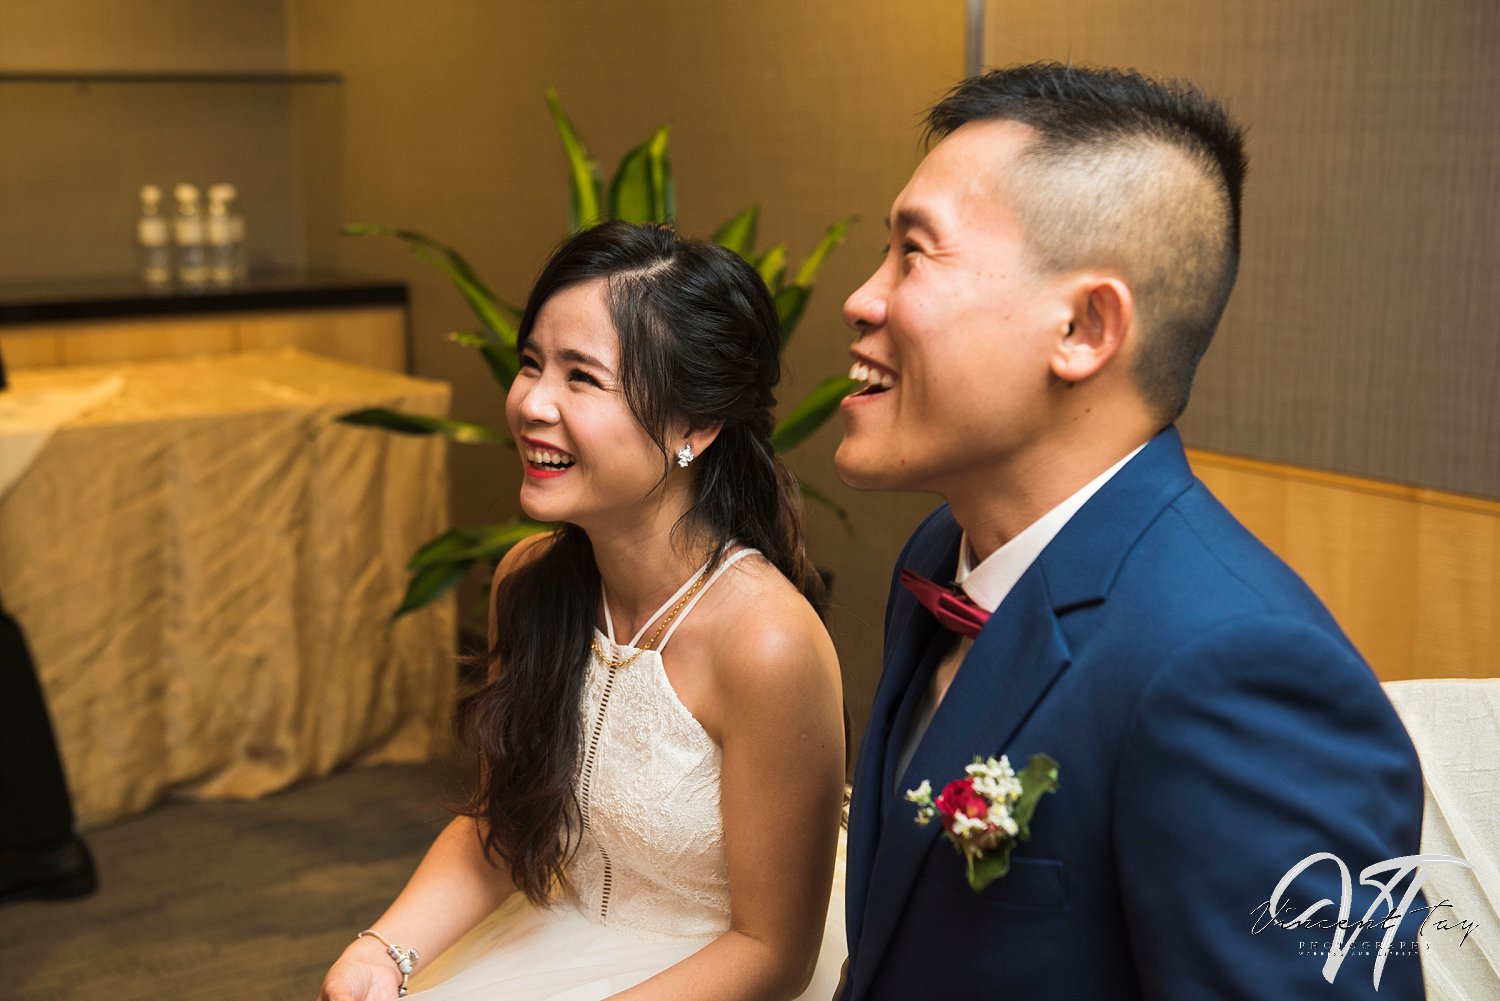 Actual Day Wedding Photography Singapore: 